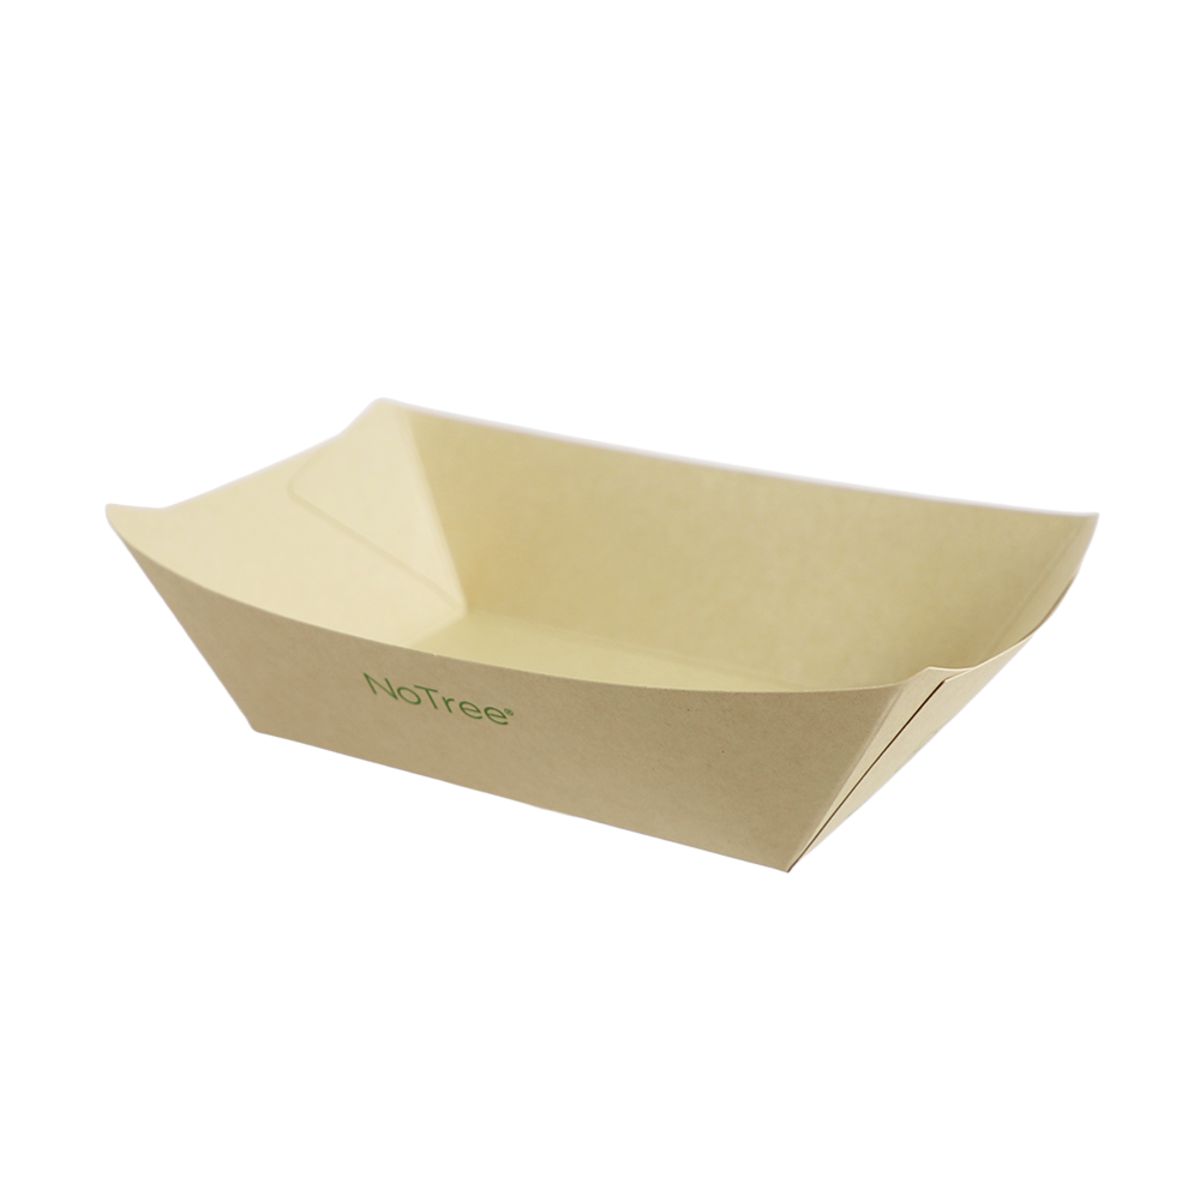 3 LB NoTree Boat Tray - Case of 500 - World Centric